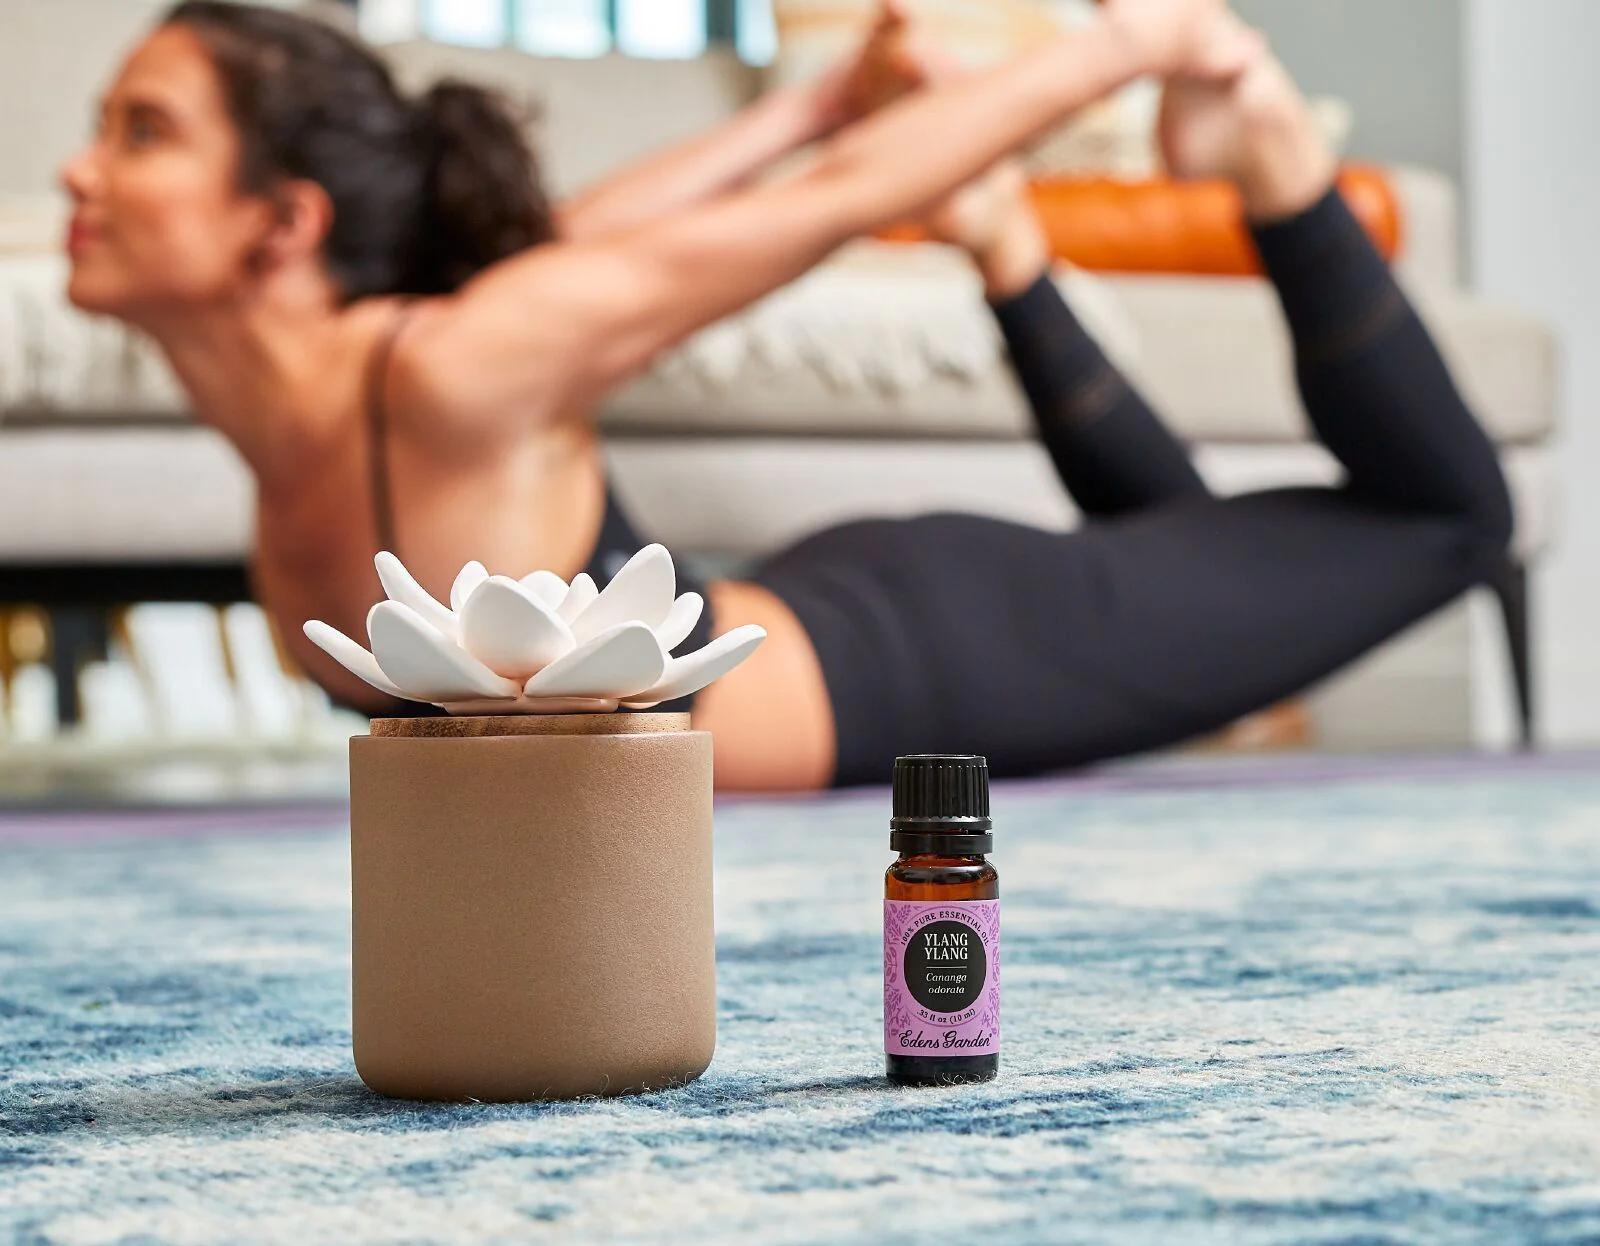 yoga and essential oils - How do you use essential oils in yoga practice